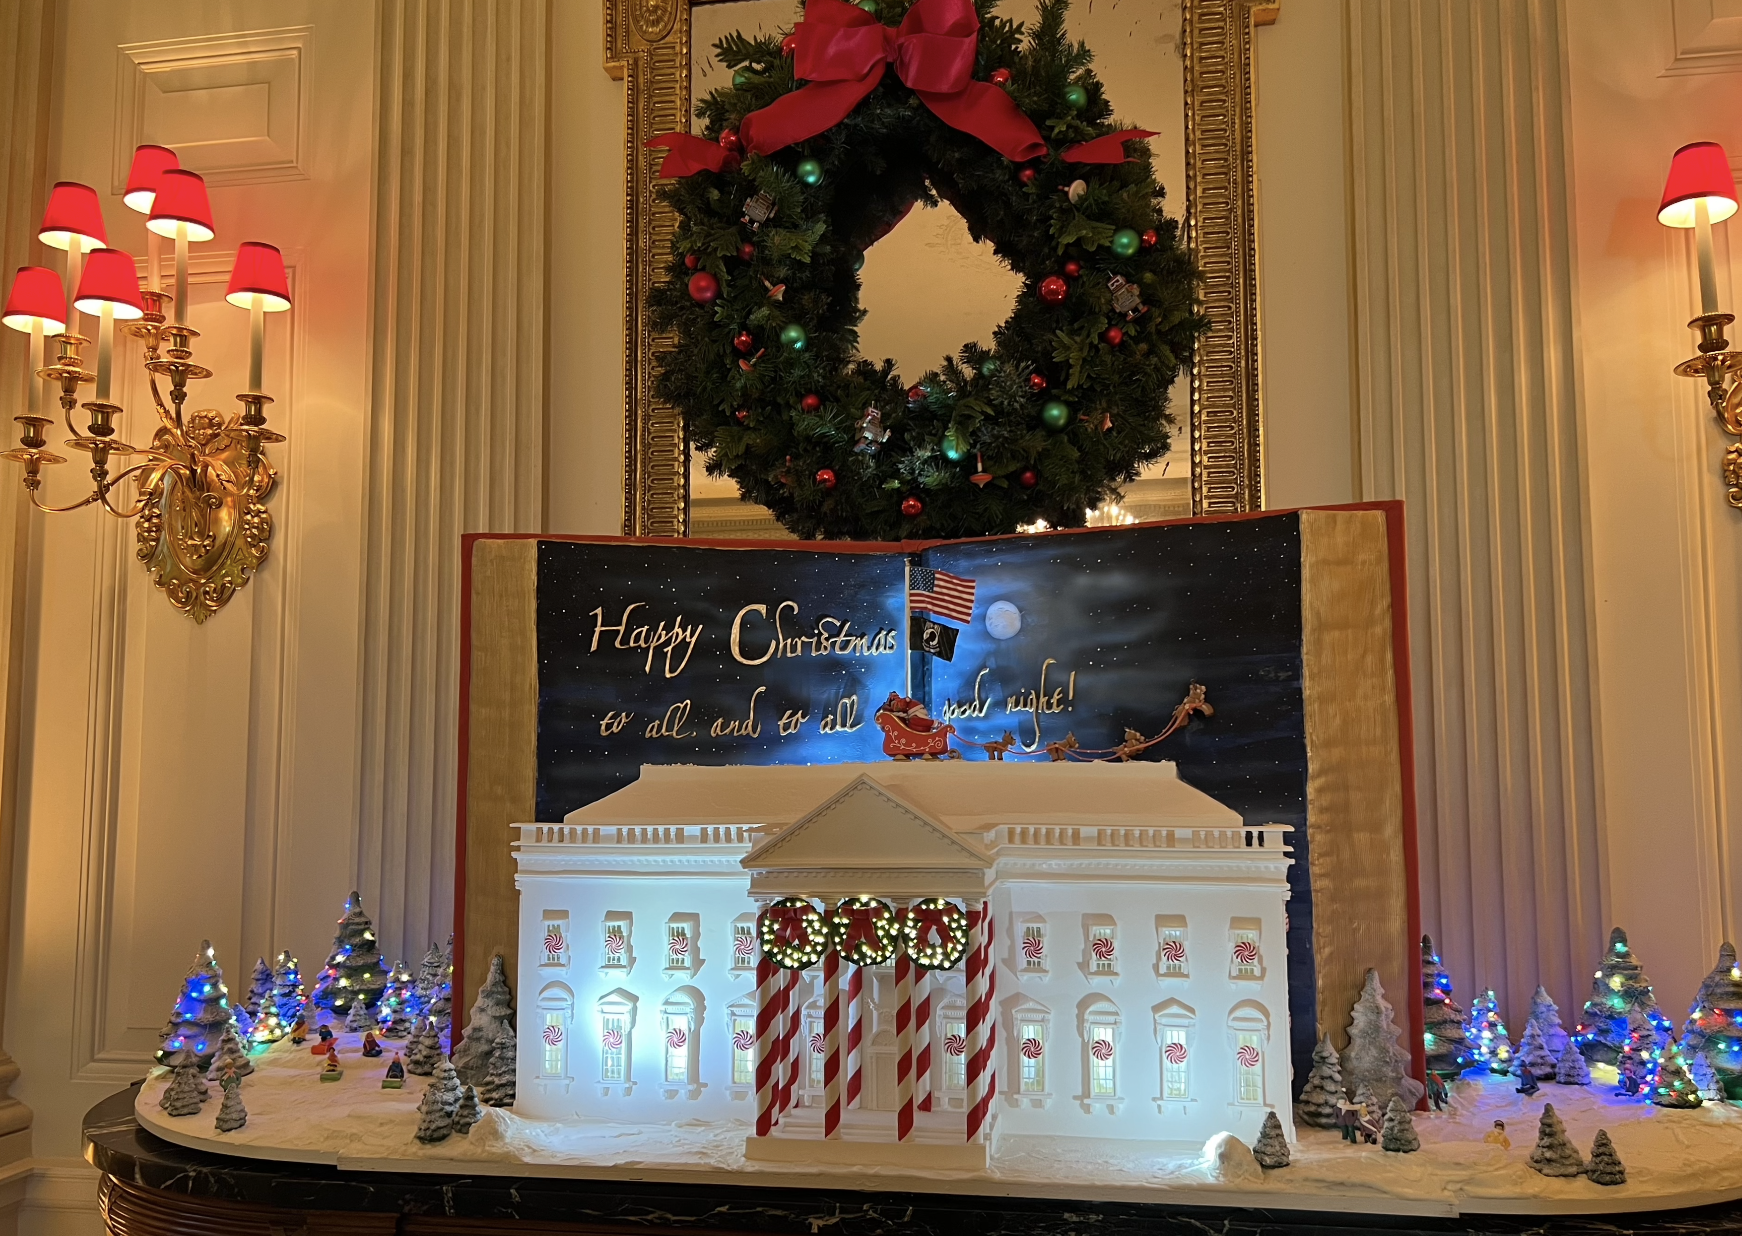 A large gingerbread house modeled after the White House.